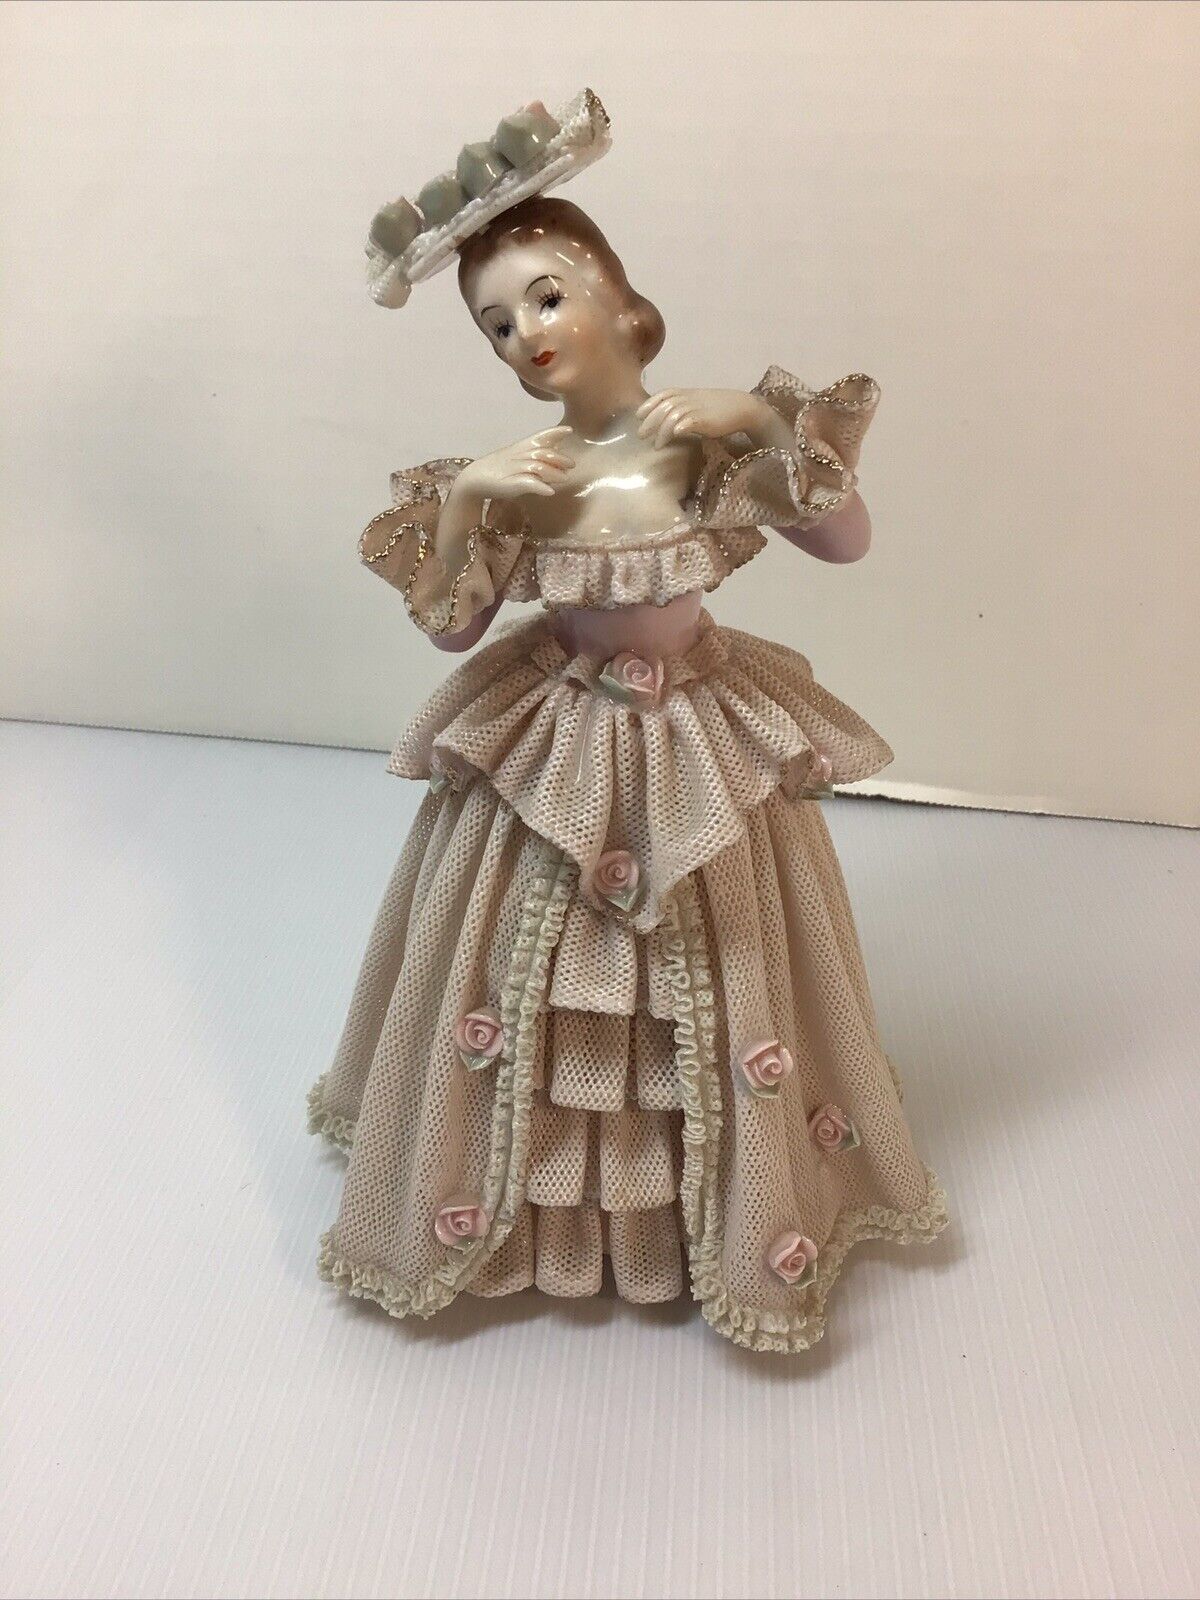 Vintage Lefton Lady Figurine, EXCULSIVES Japan, Starched Lace,VERY RARE